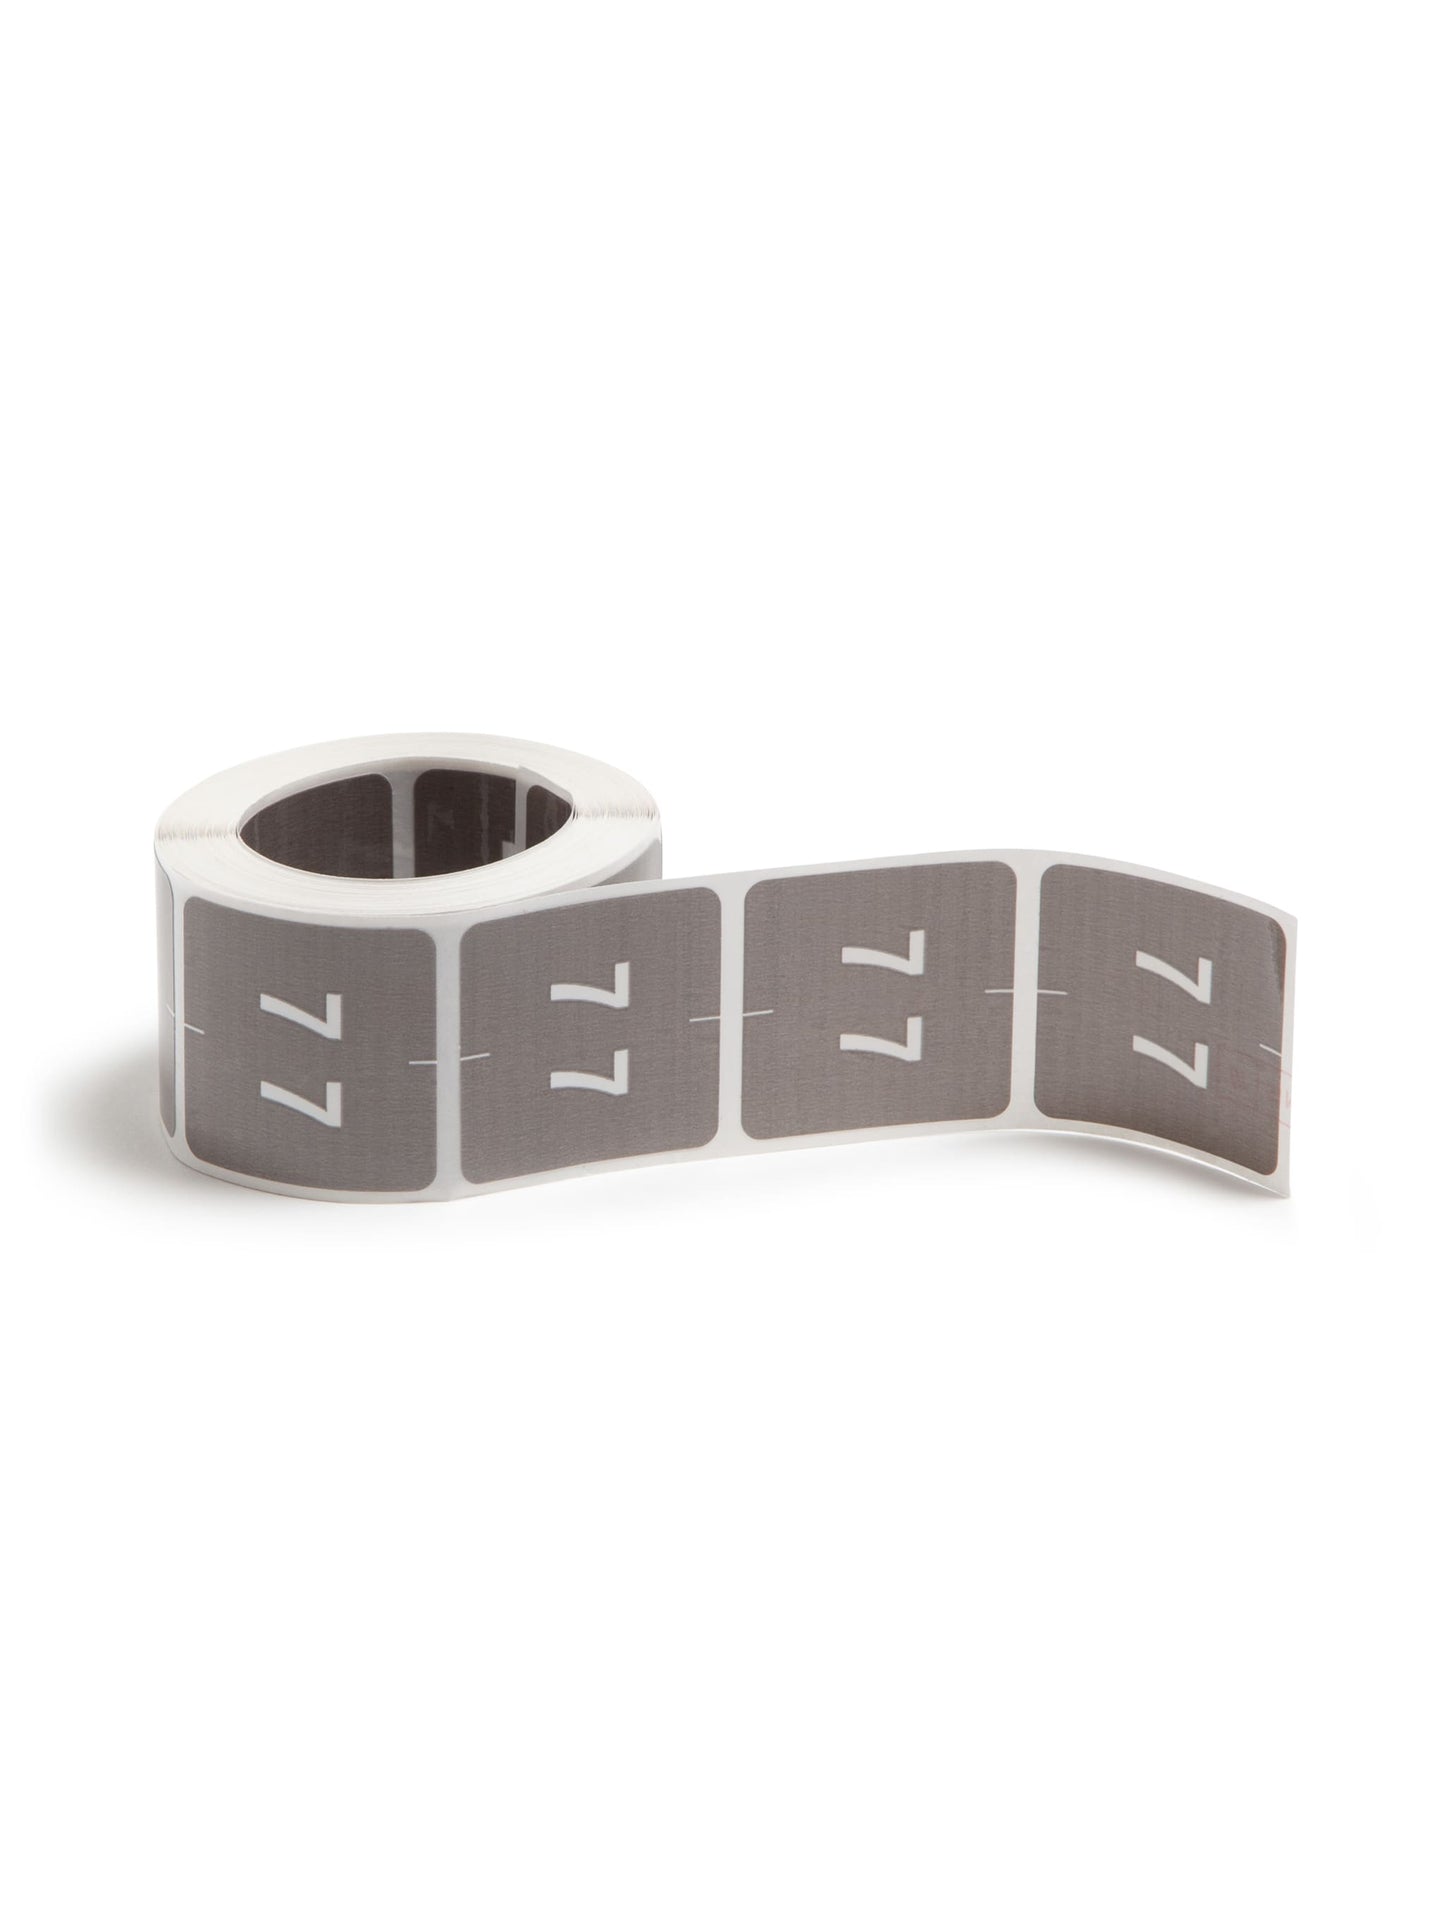 DCC Color-Coded Numeric Labels - Rolls, Gray Color, 1-1/2" X 1-1/2" Size, Set of 1, 086486674270